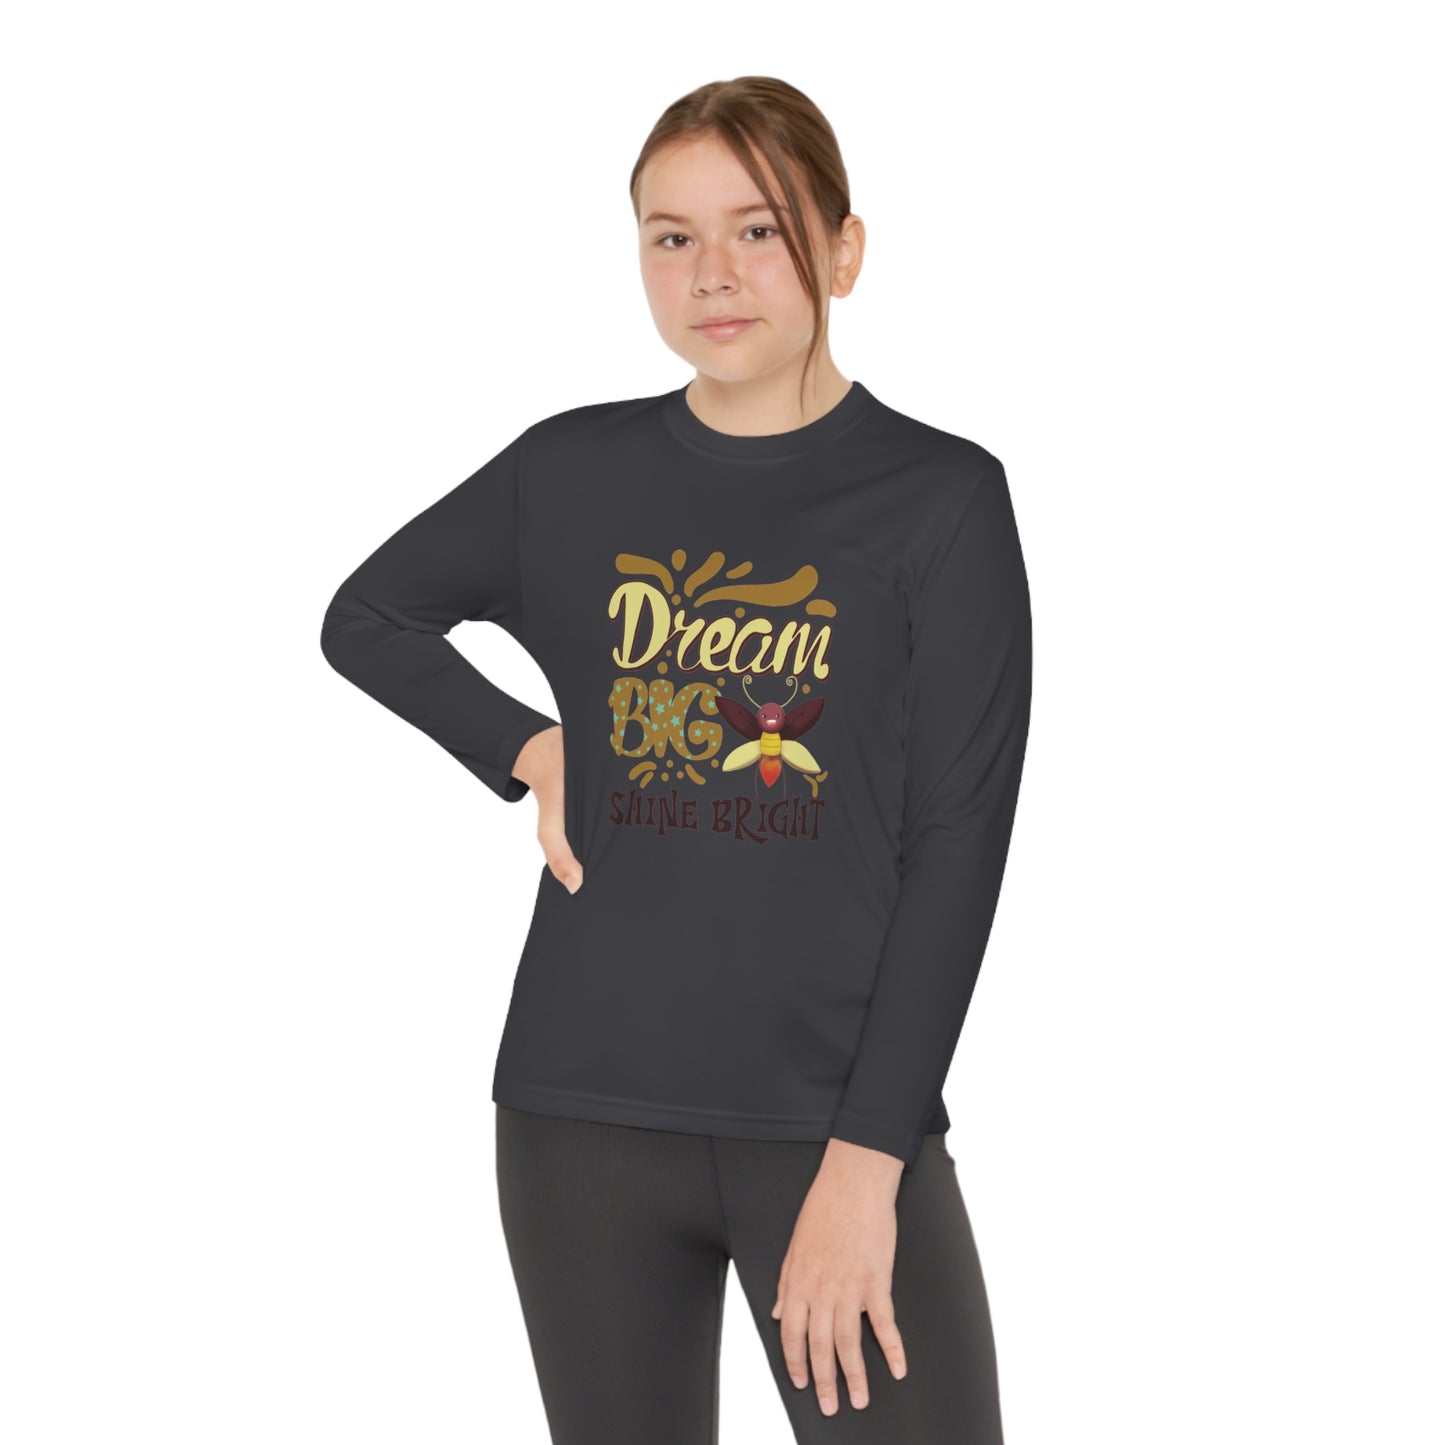 Youth Long Sleeve Competitor Tee - Dream big